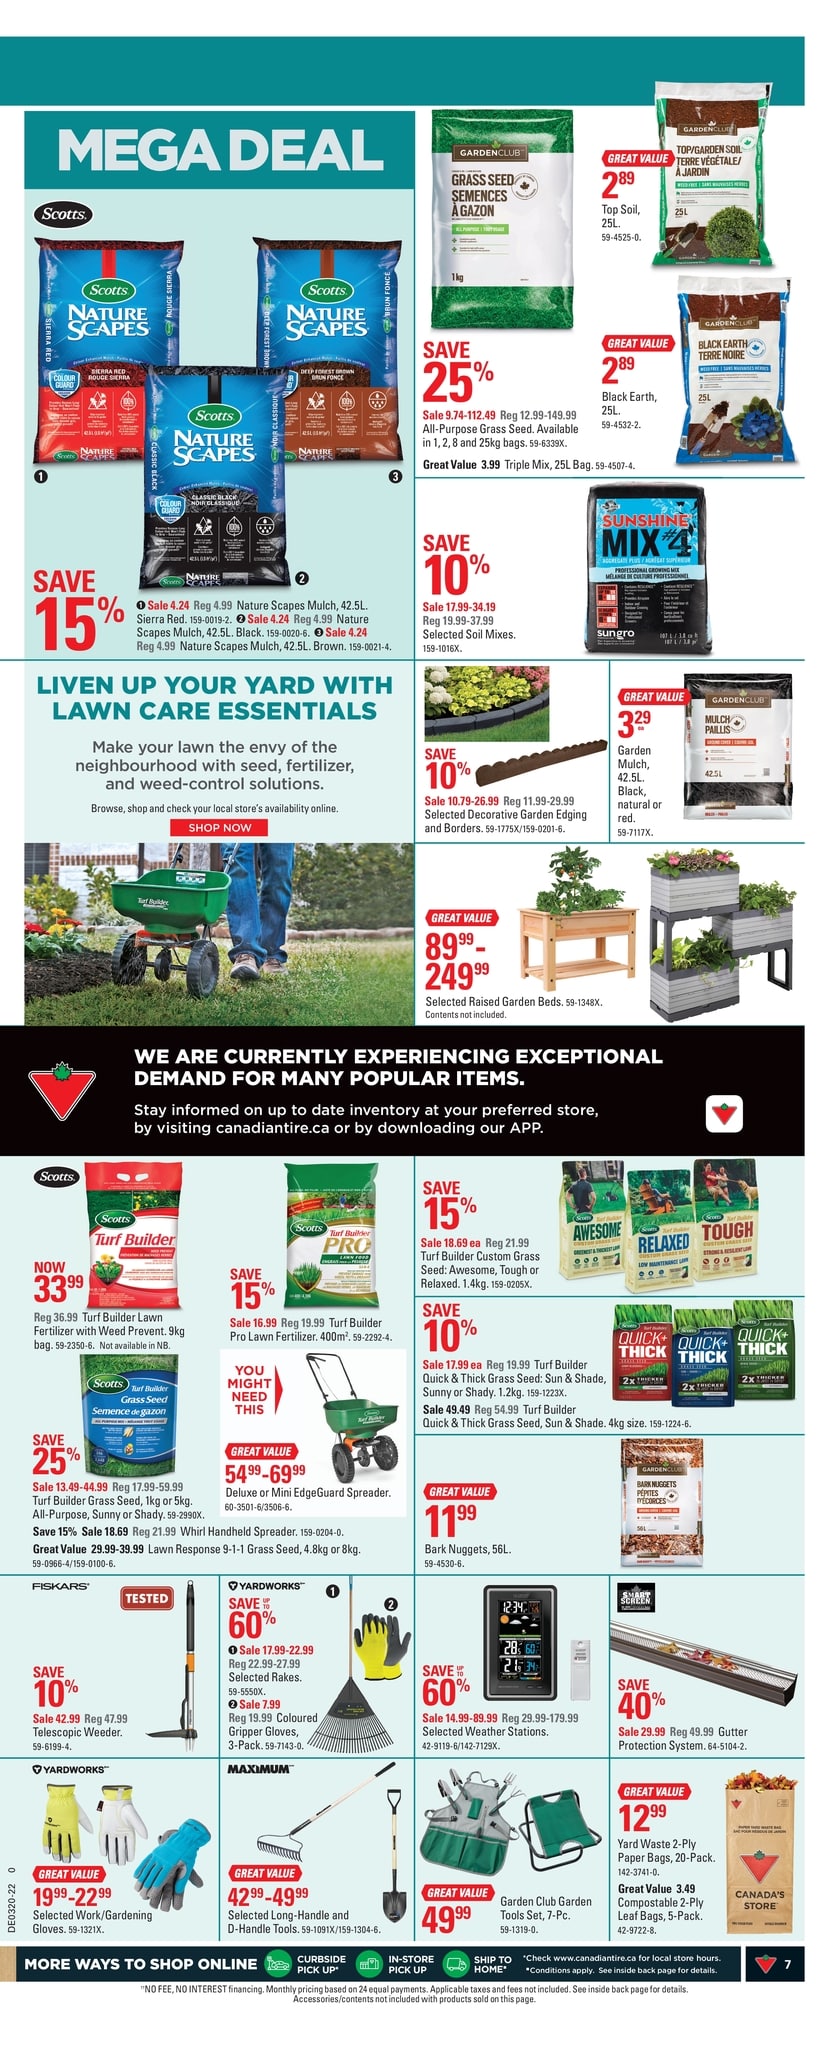 Canadian Tire - Weekly Flyer Specials - Page 7